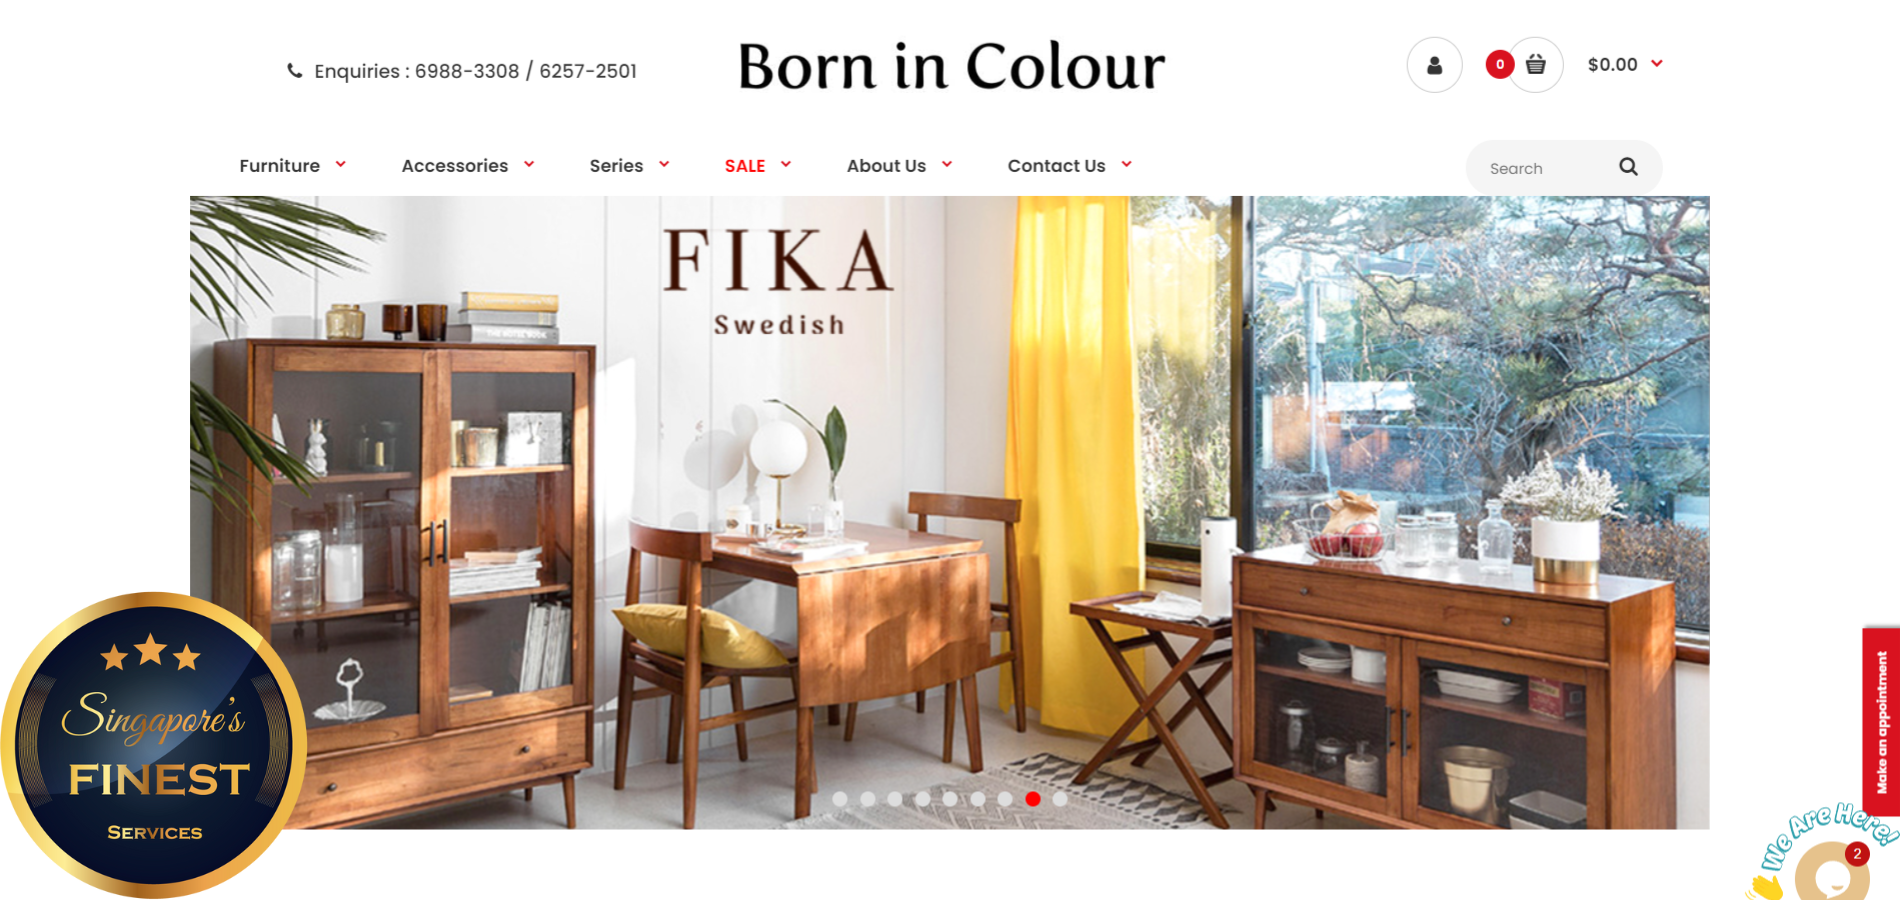 The Finest Home Furniture Stores in Singapore